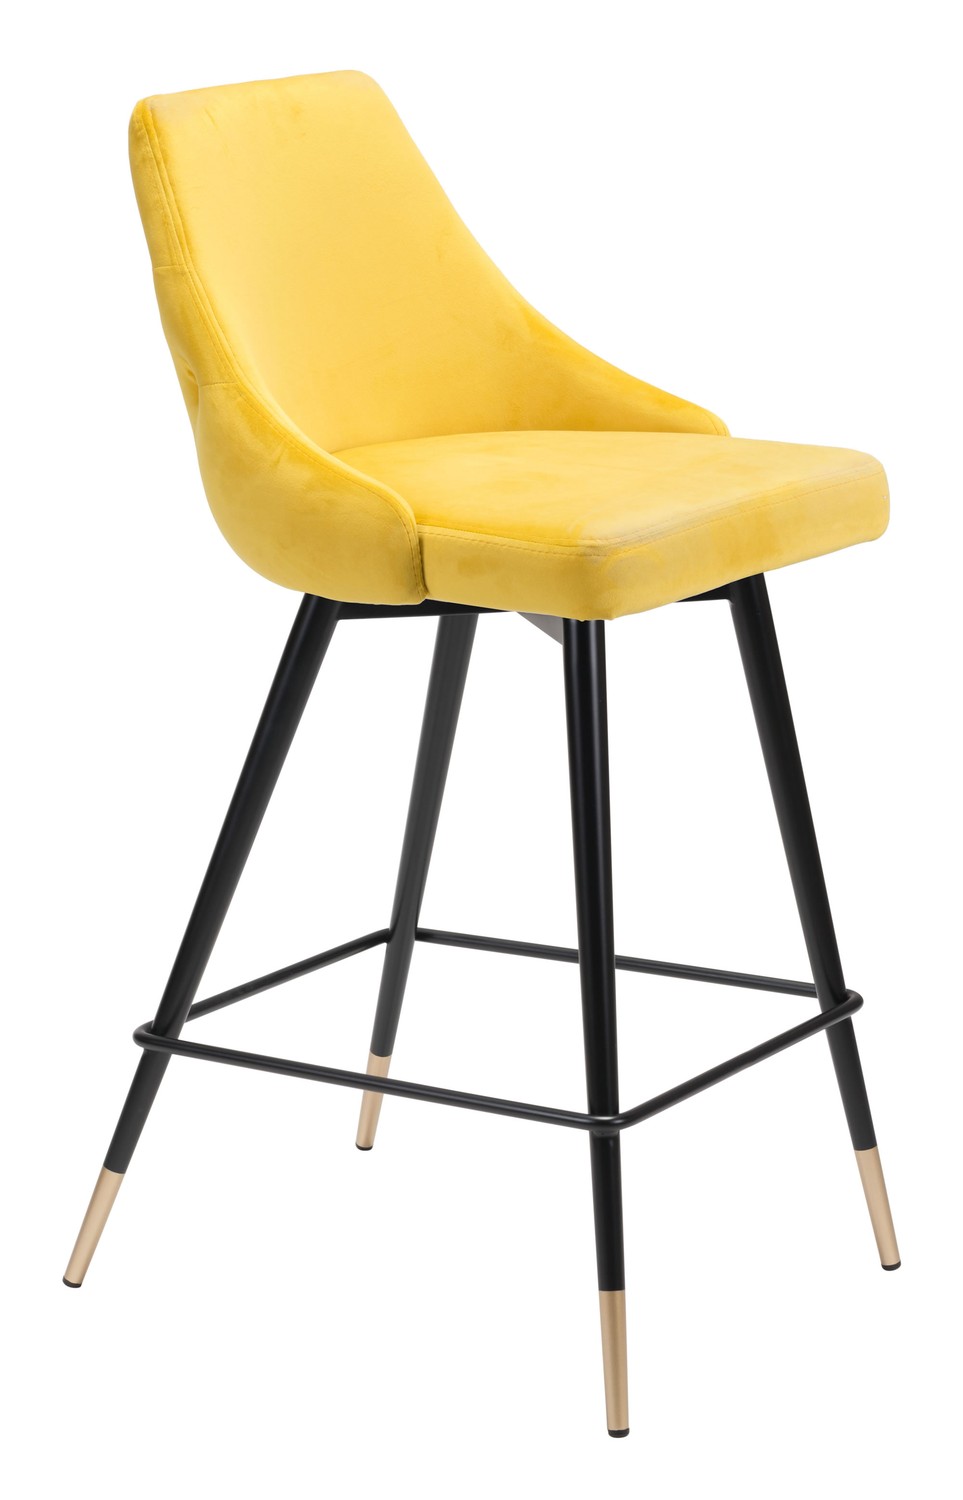 18.5" x 20.9" x 36.4" Yellow, Velvet, Stainless Steel, Counter Chair